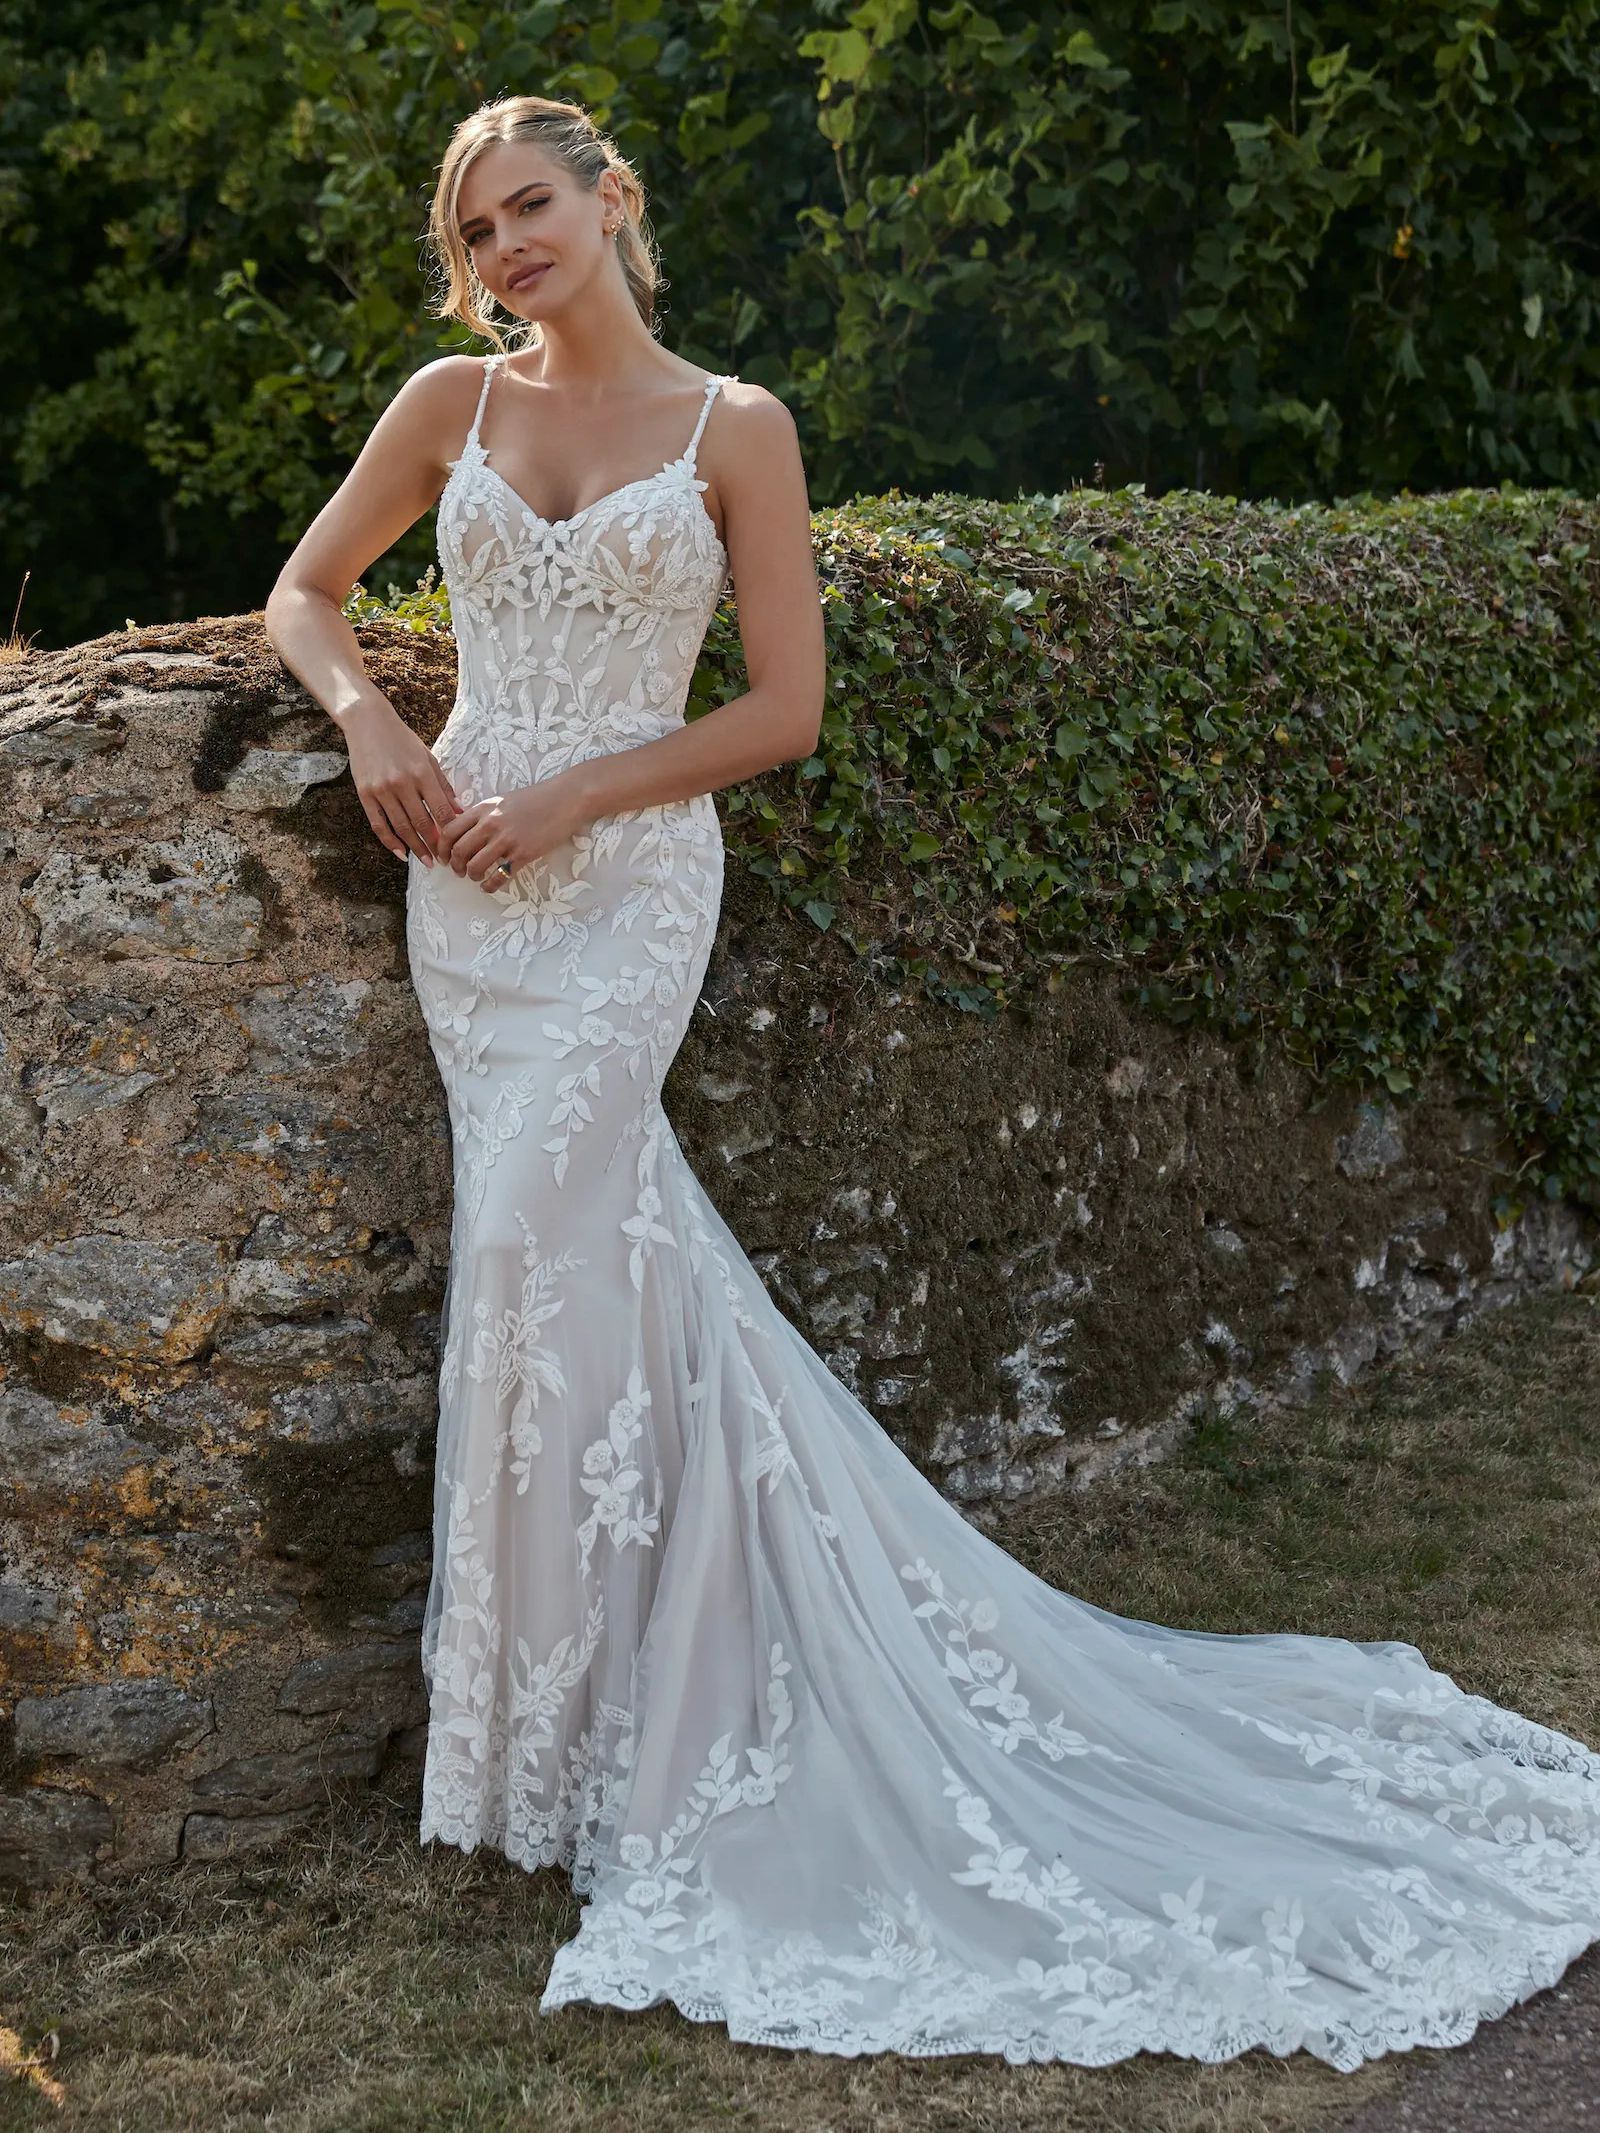 JW220931
Covered in floral lace this fit and flare style dress is simply beautiful with a V-neckline